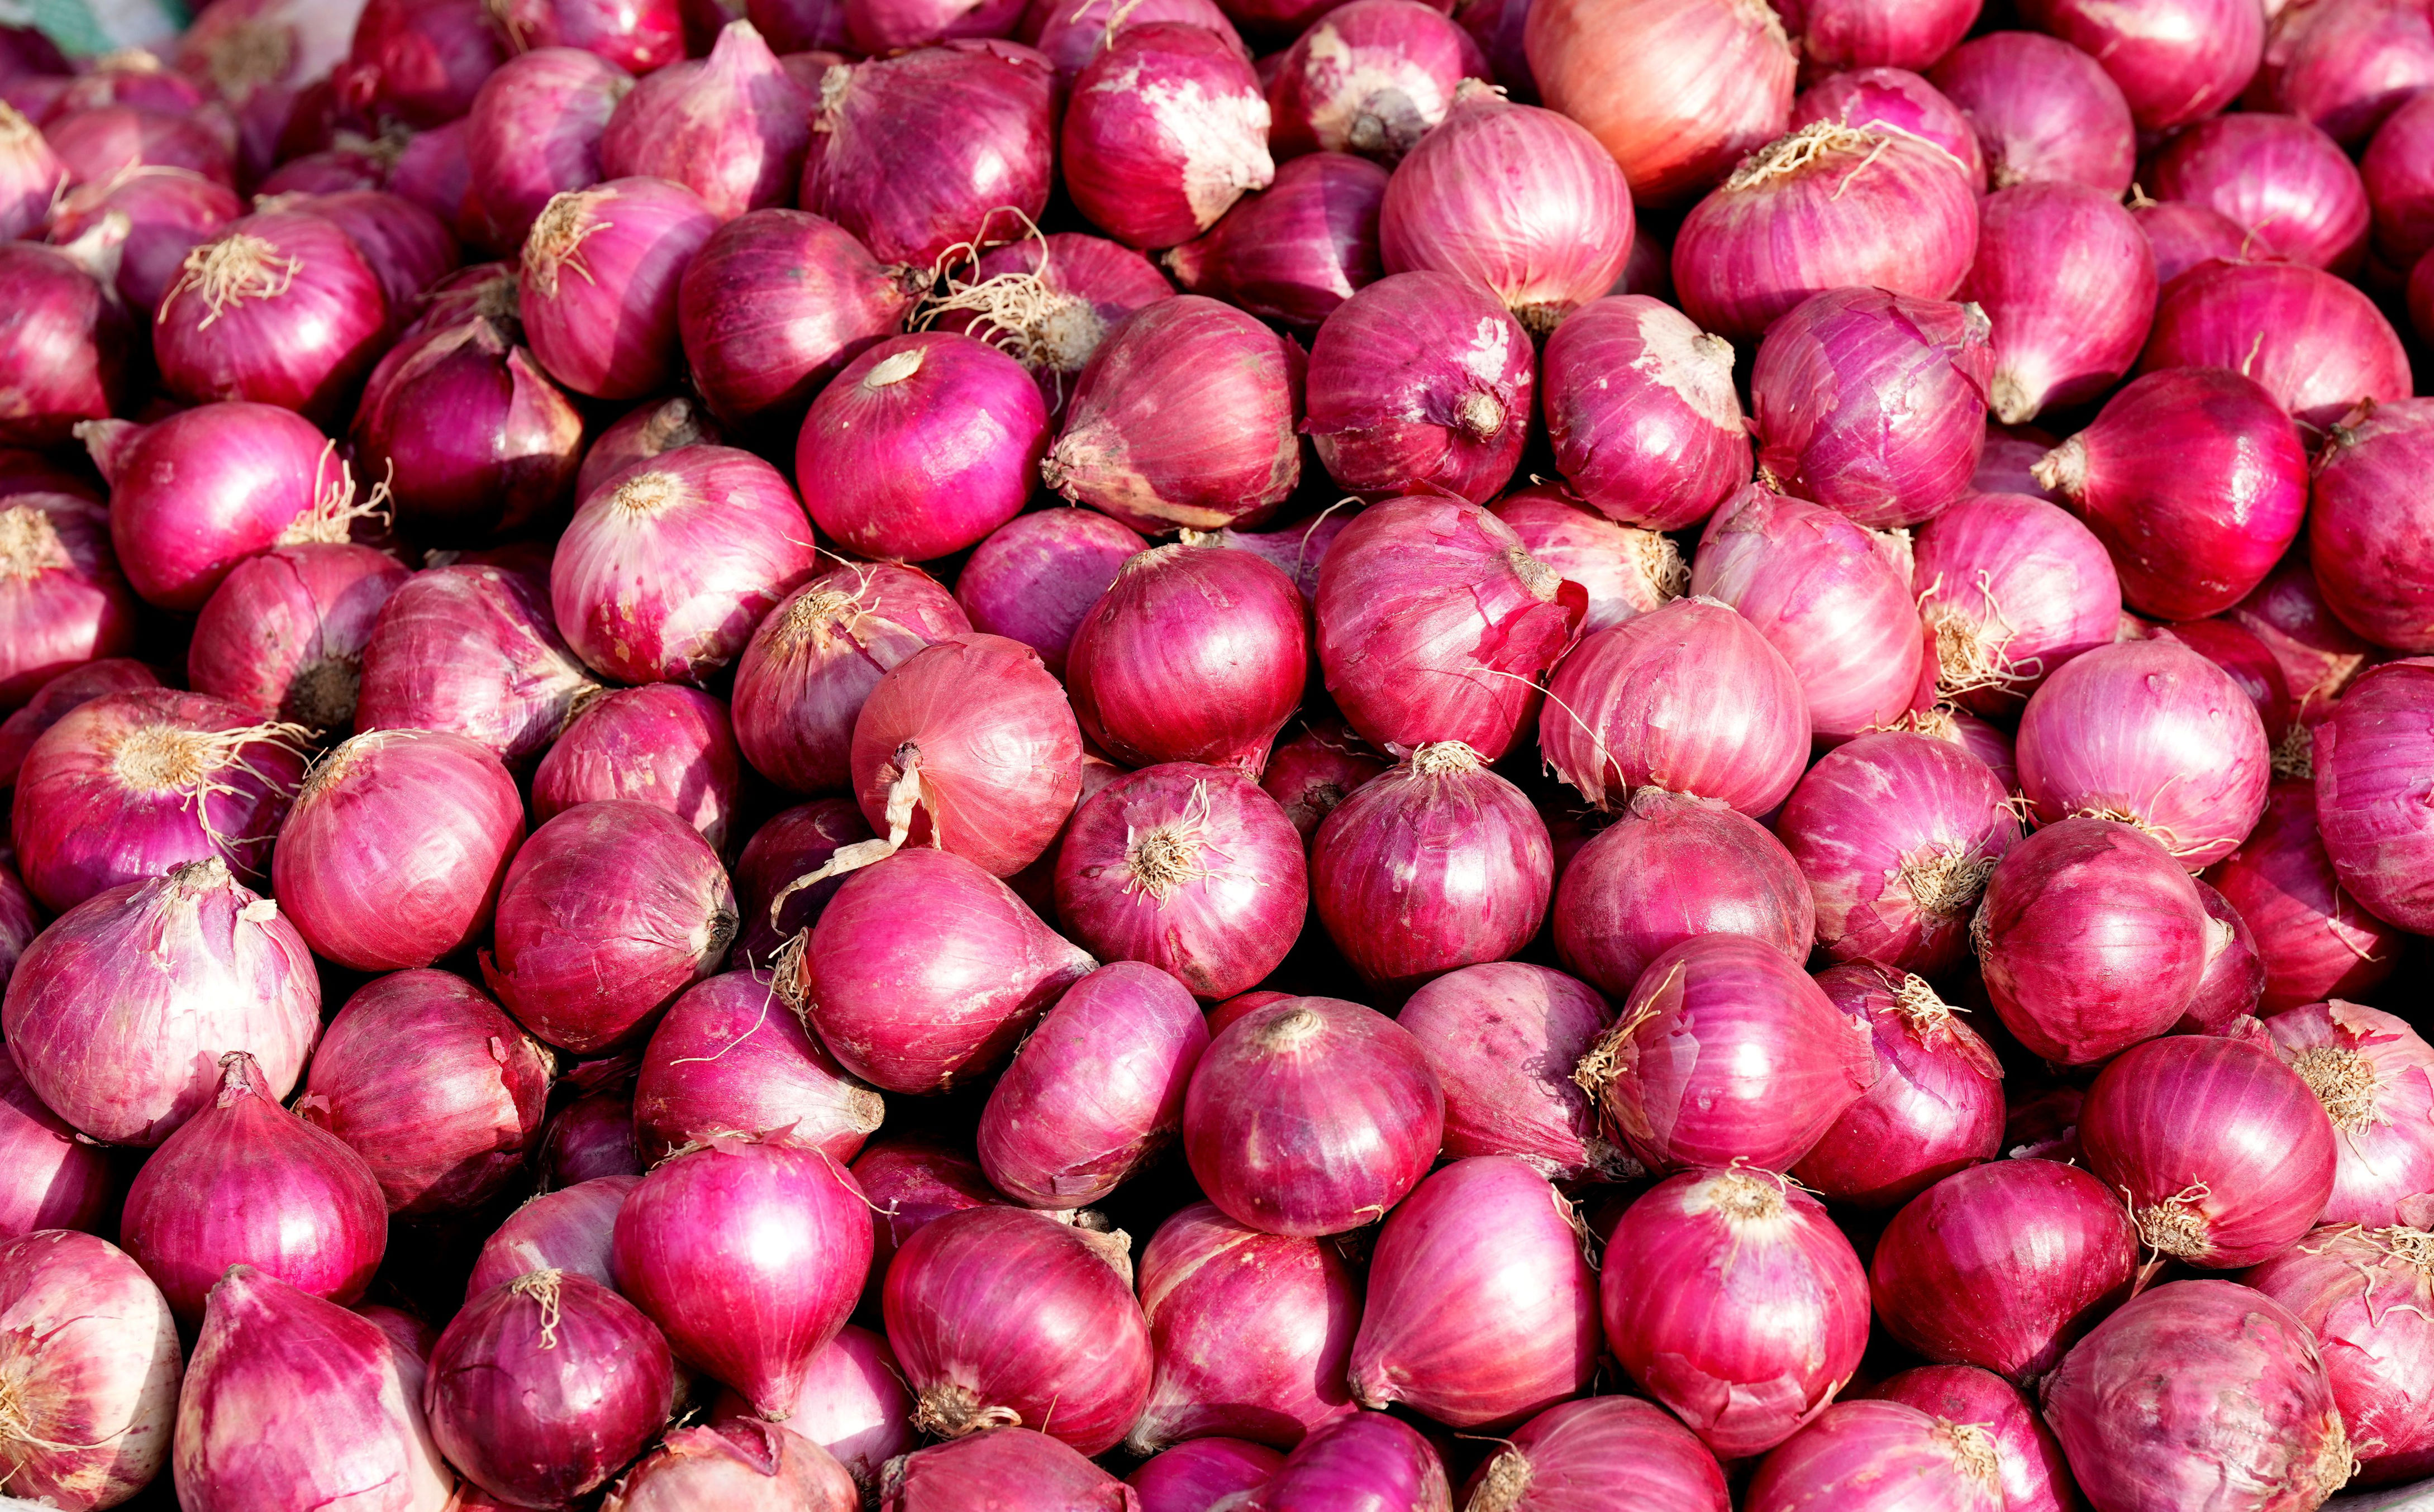 govt lifts ban on onion exports; imposes minimum export price of usd 550/tonne